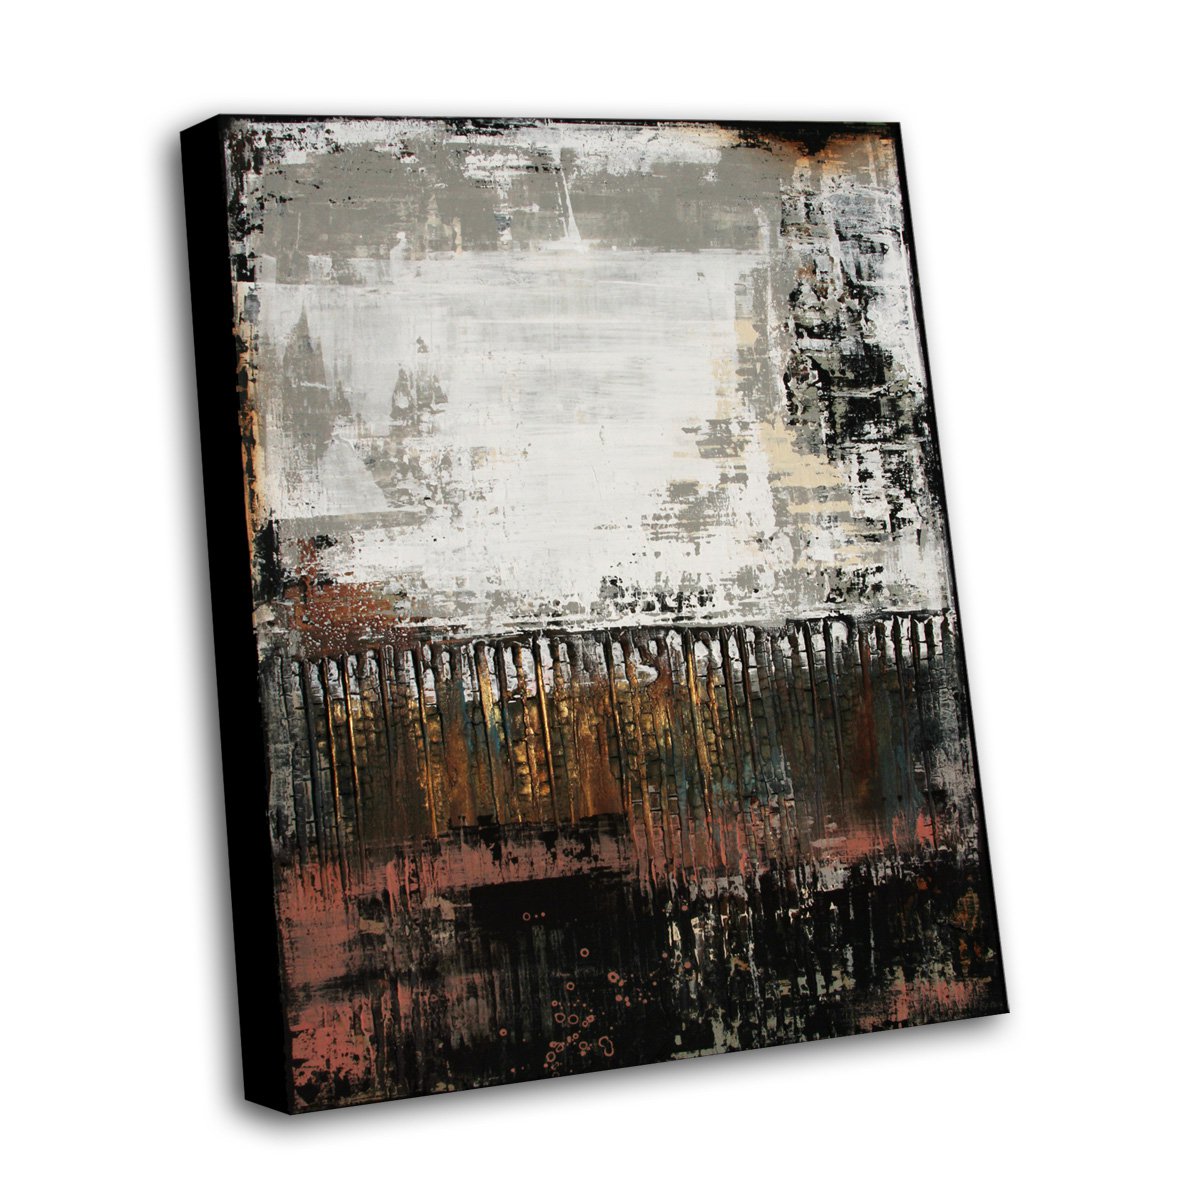 DARK WHISPERS - 60 x 80 CMS - ABSTRACT TEXTURED ARTWORK ON CANVAS by Inez Froehlich